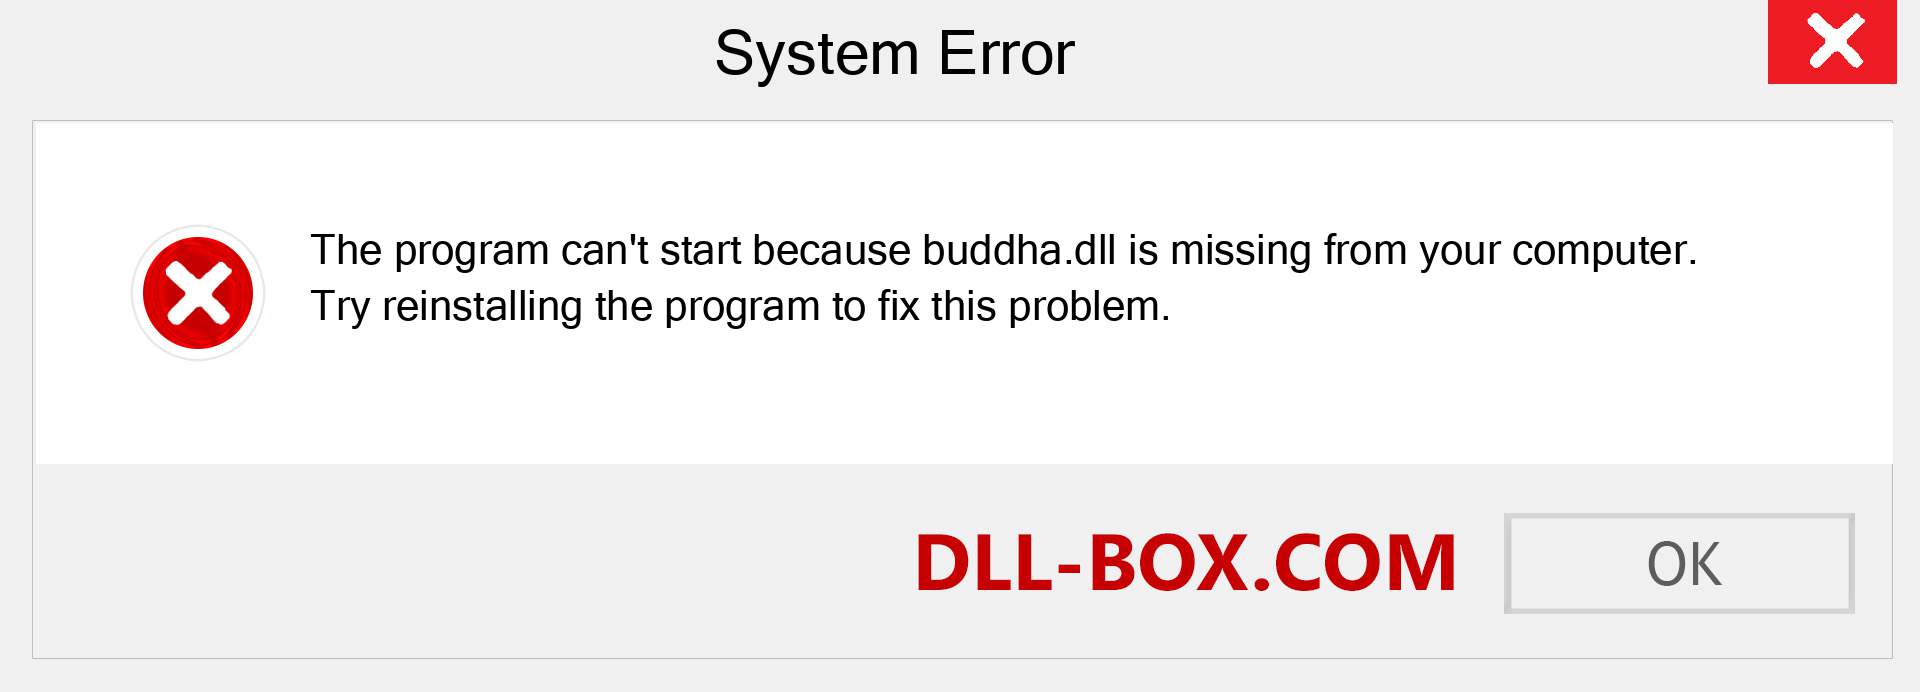  buddha.dll file is missing?. Download for Windows 7, 8, 10 - Fix  buddha dll Missing Error on Windows, photos, images